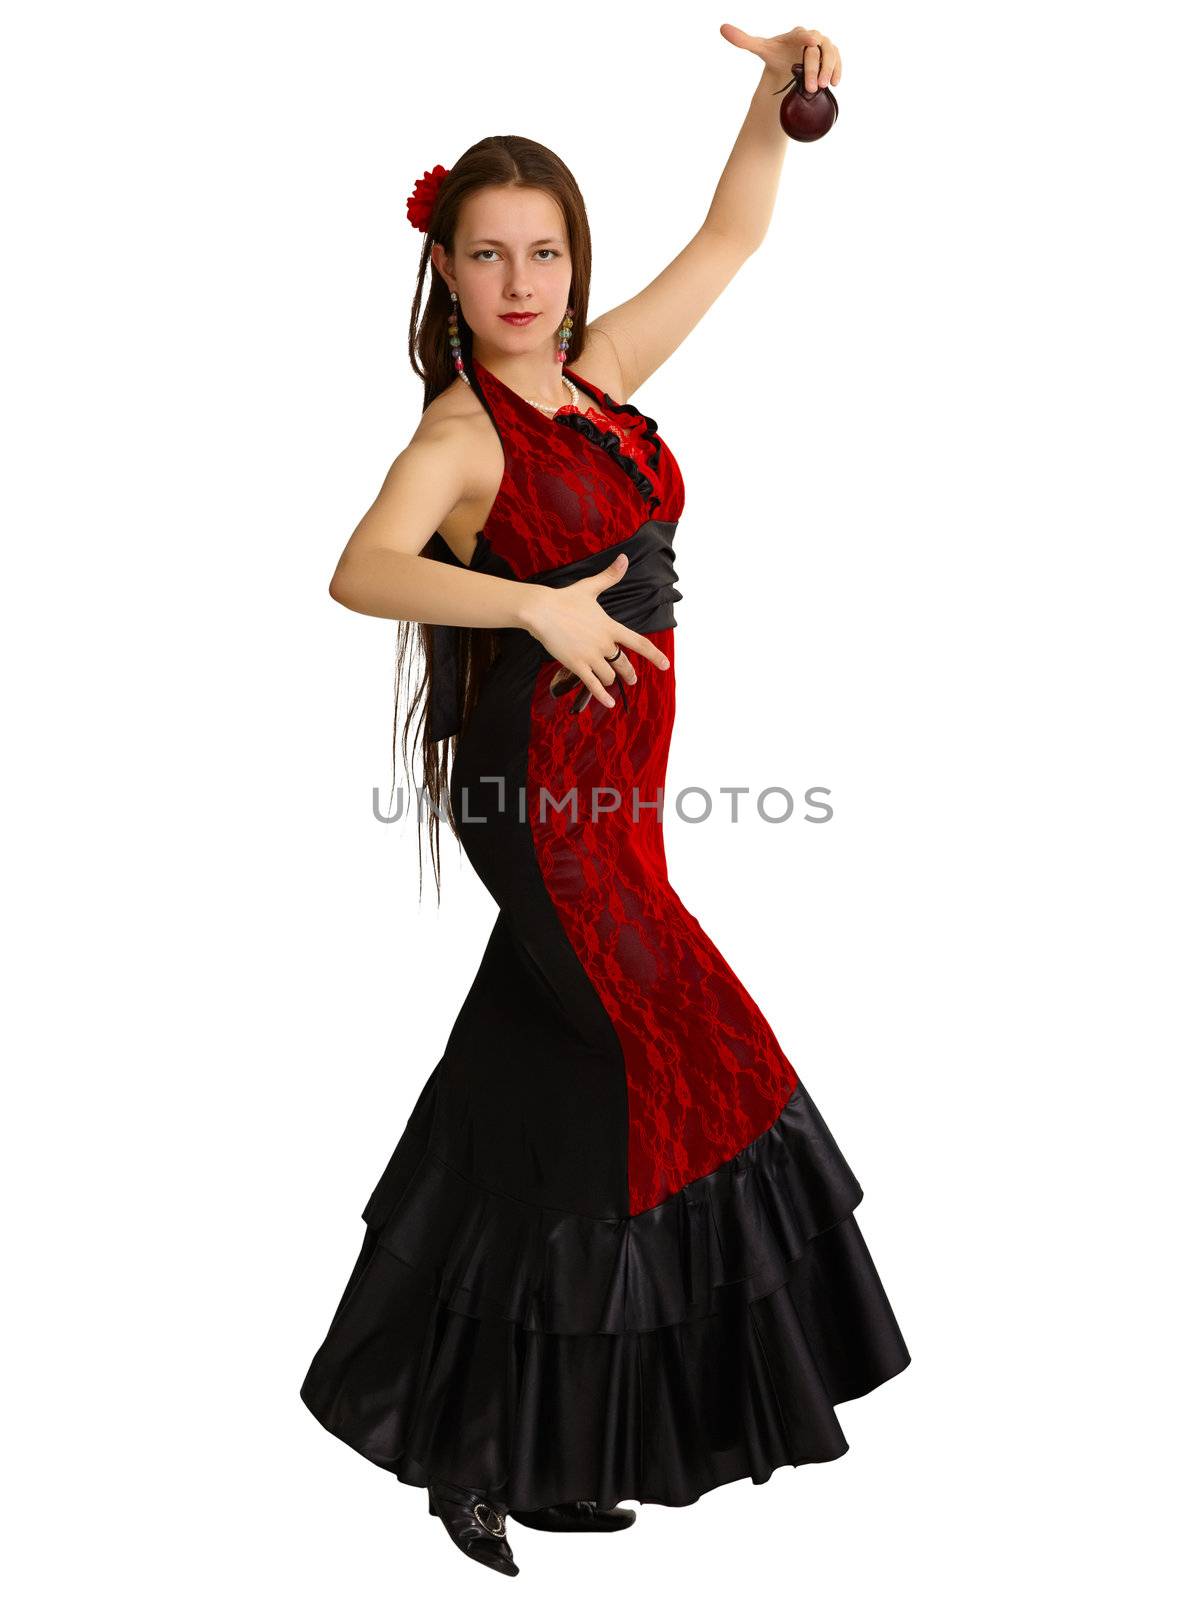 A young girl performs Spanish dance with castanets by pzaxe